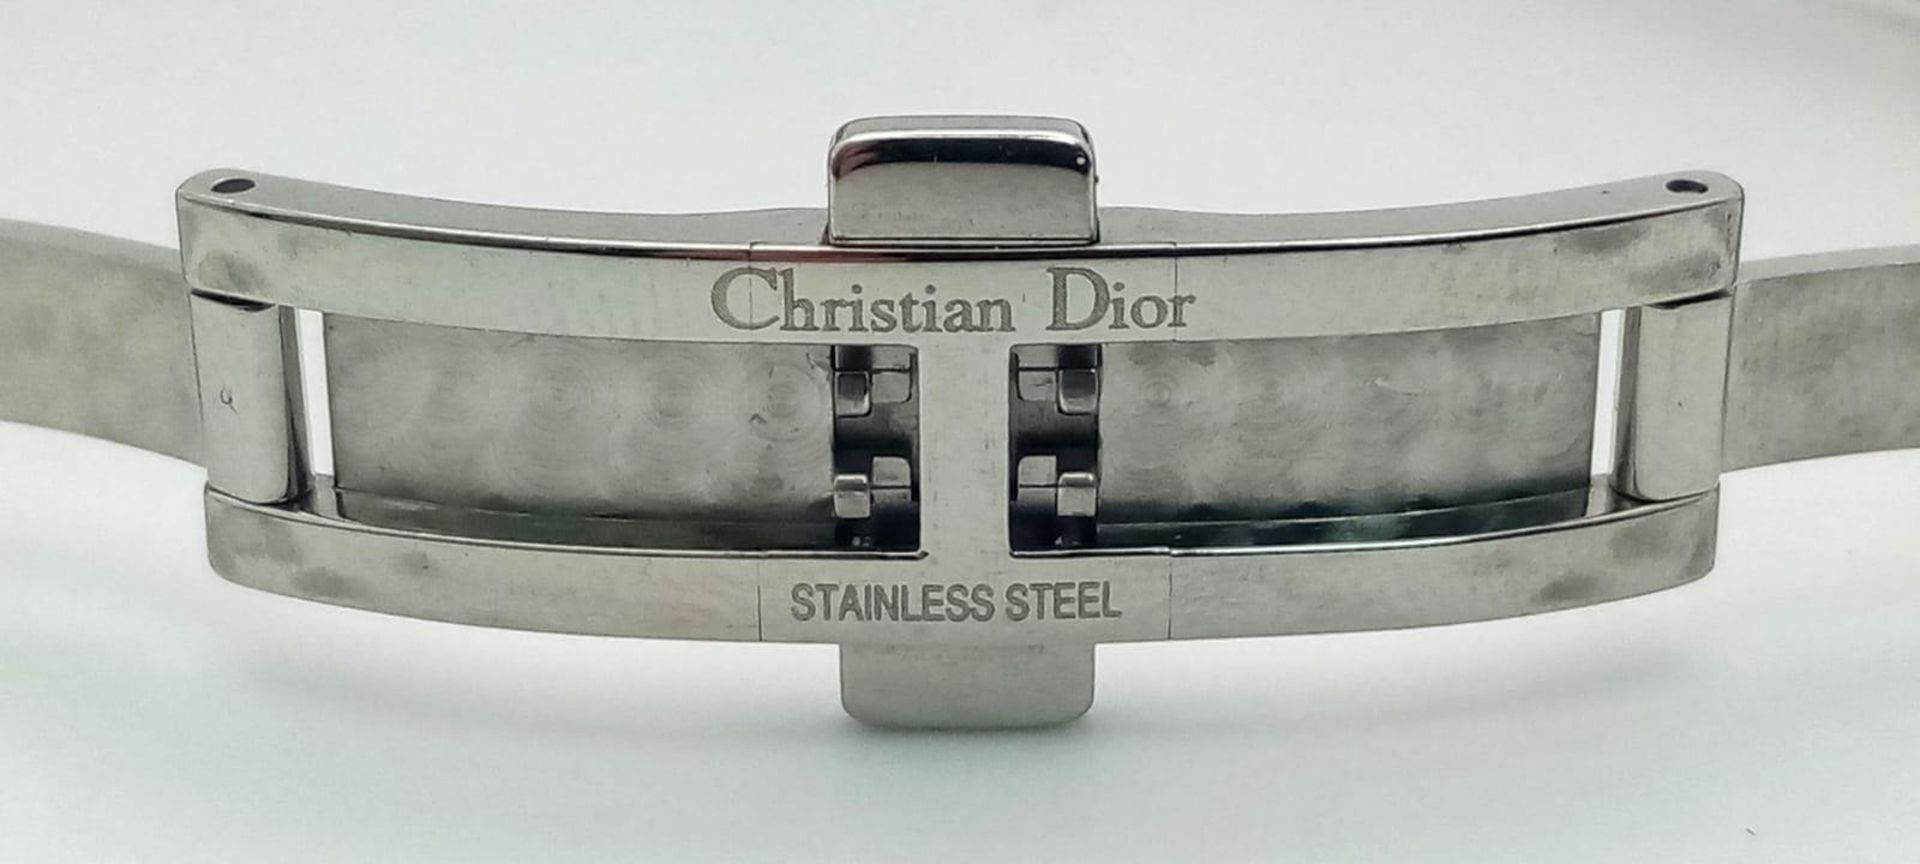 A Designer Christian Dior Quartz Ladies Watch. Stainless steel bracelet and case - 23mm. White dial. - Image 8 of 10